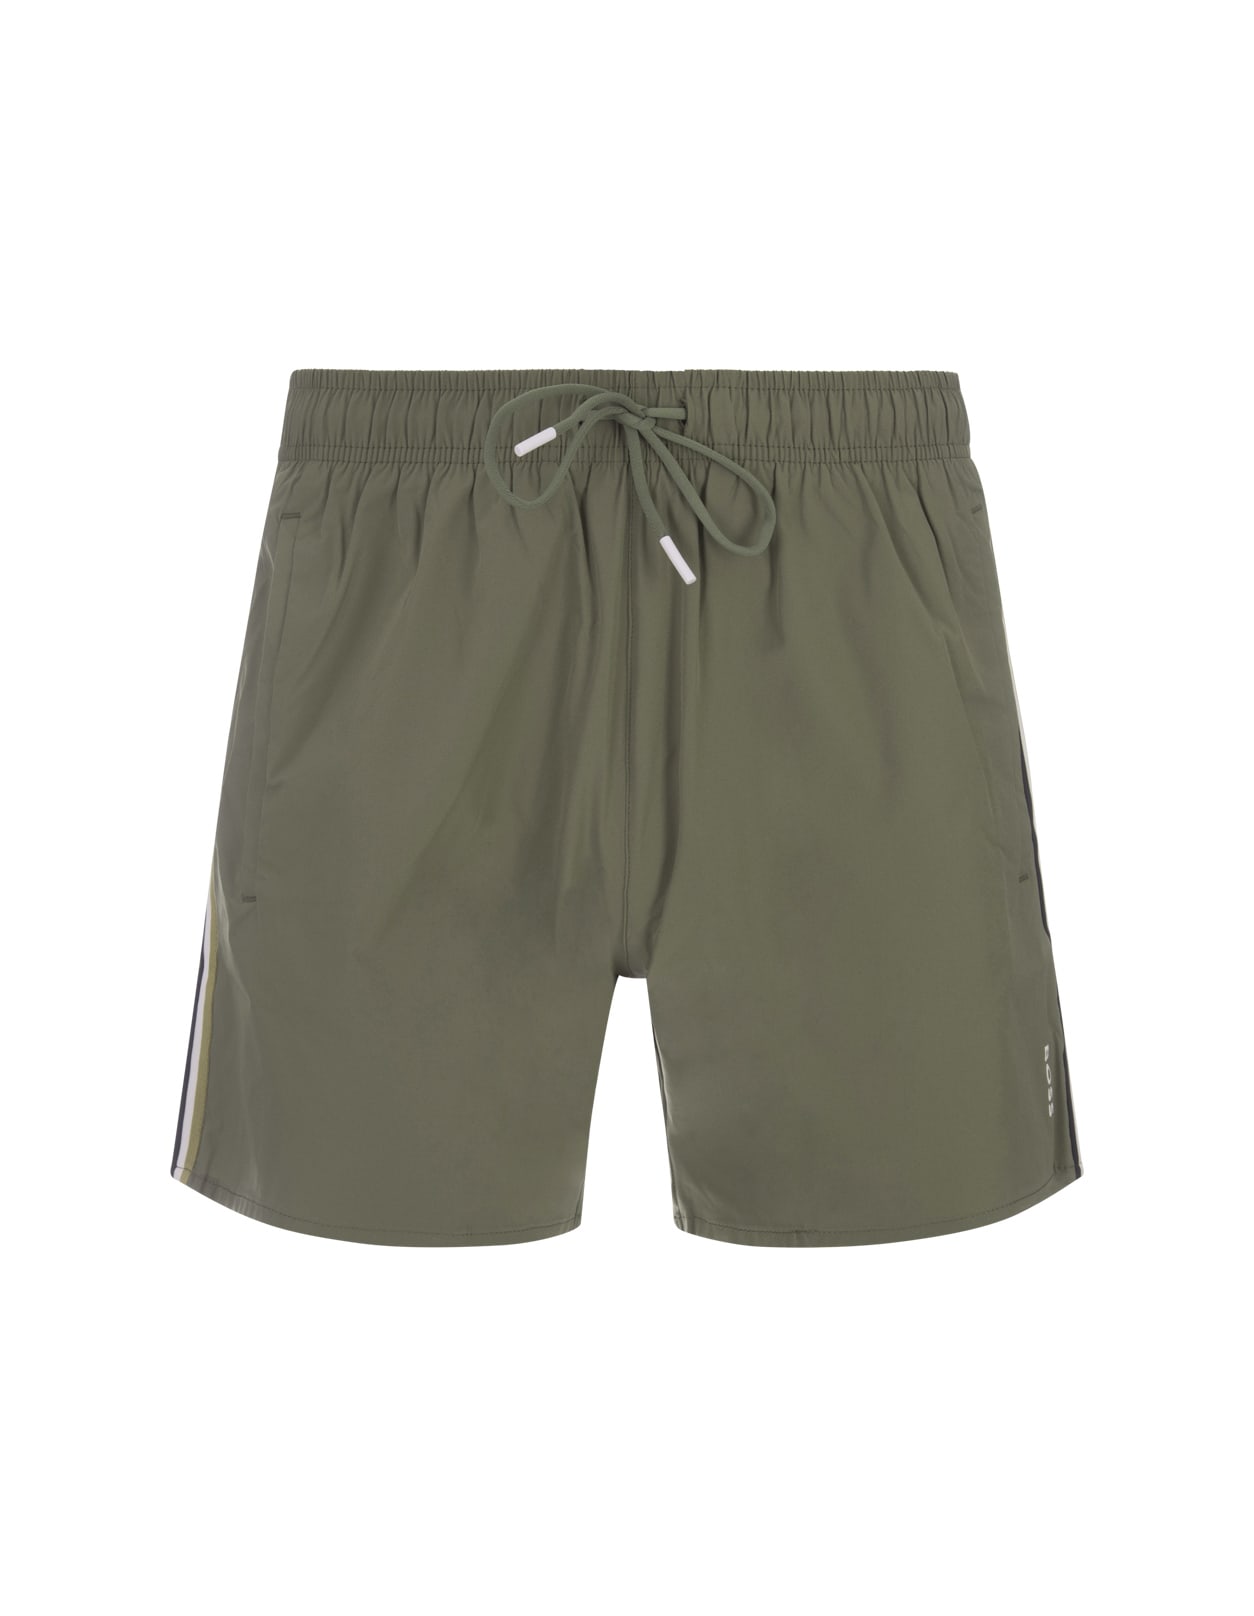 Khaki Beach Boxers With Typical Brand Stripes And Logo